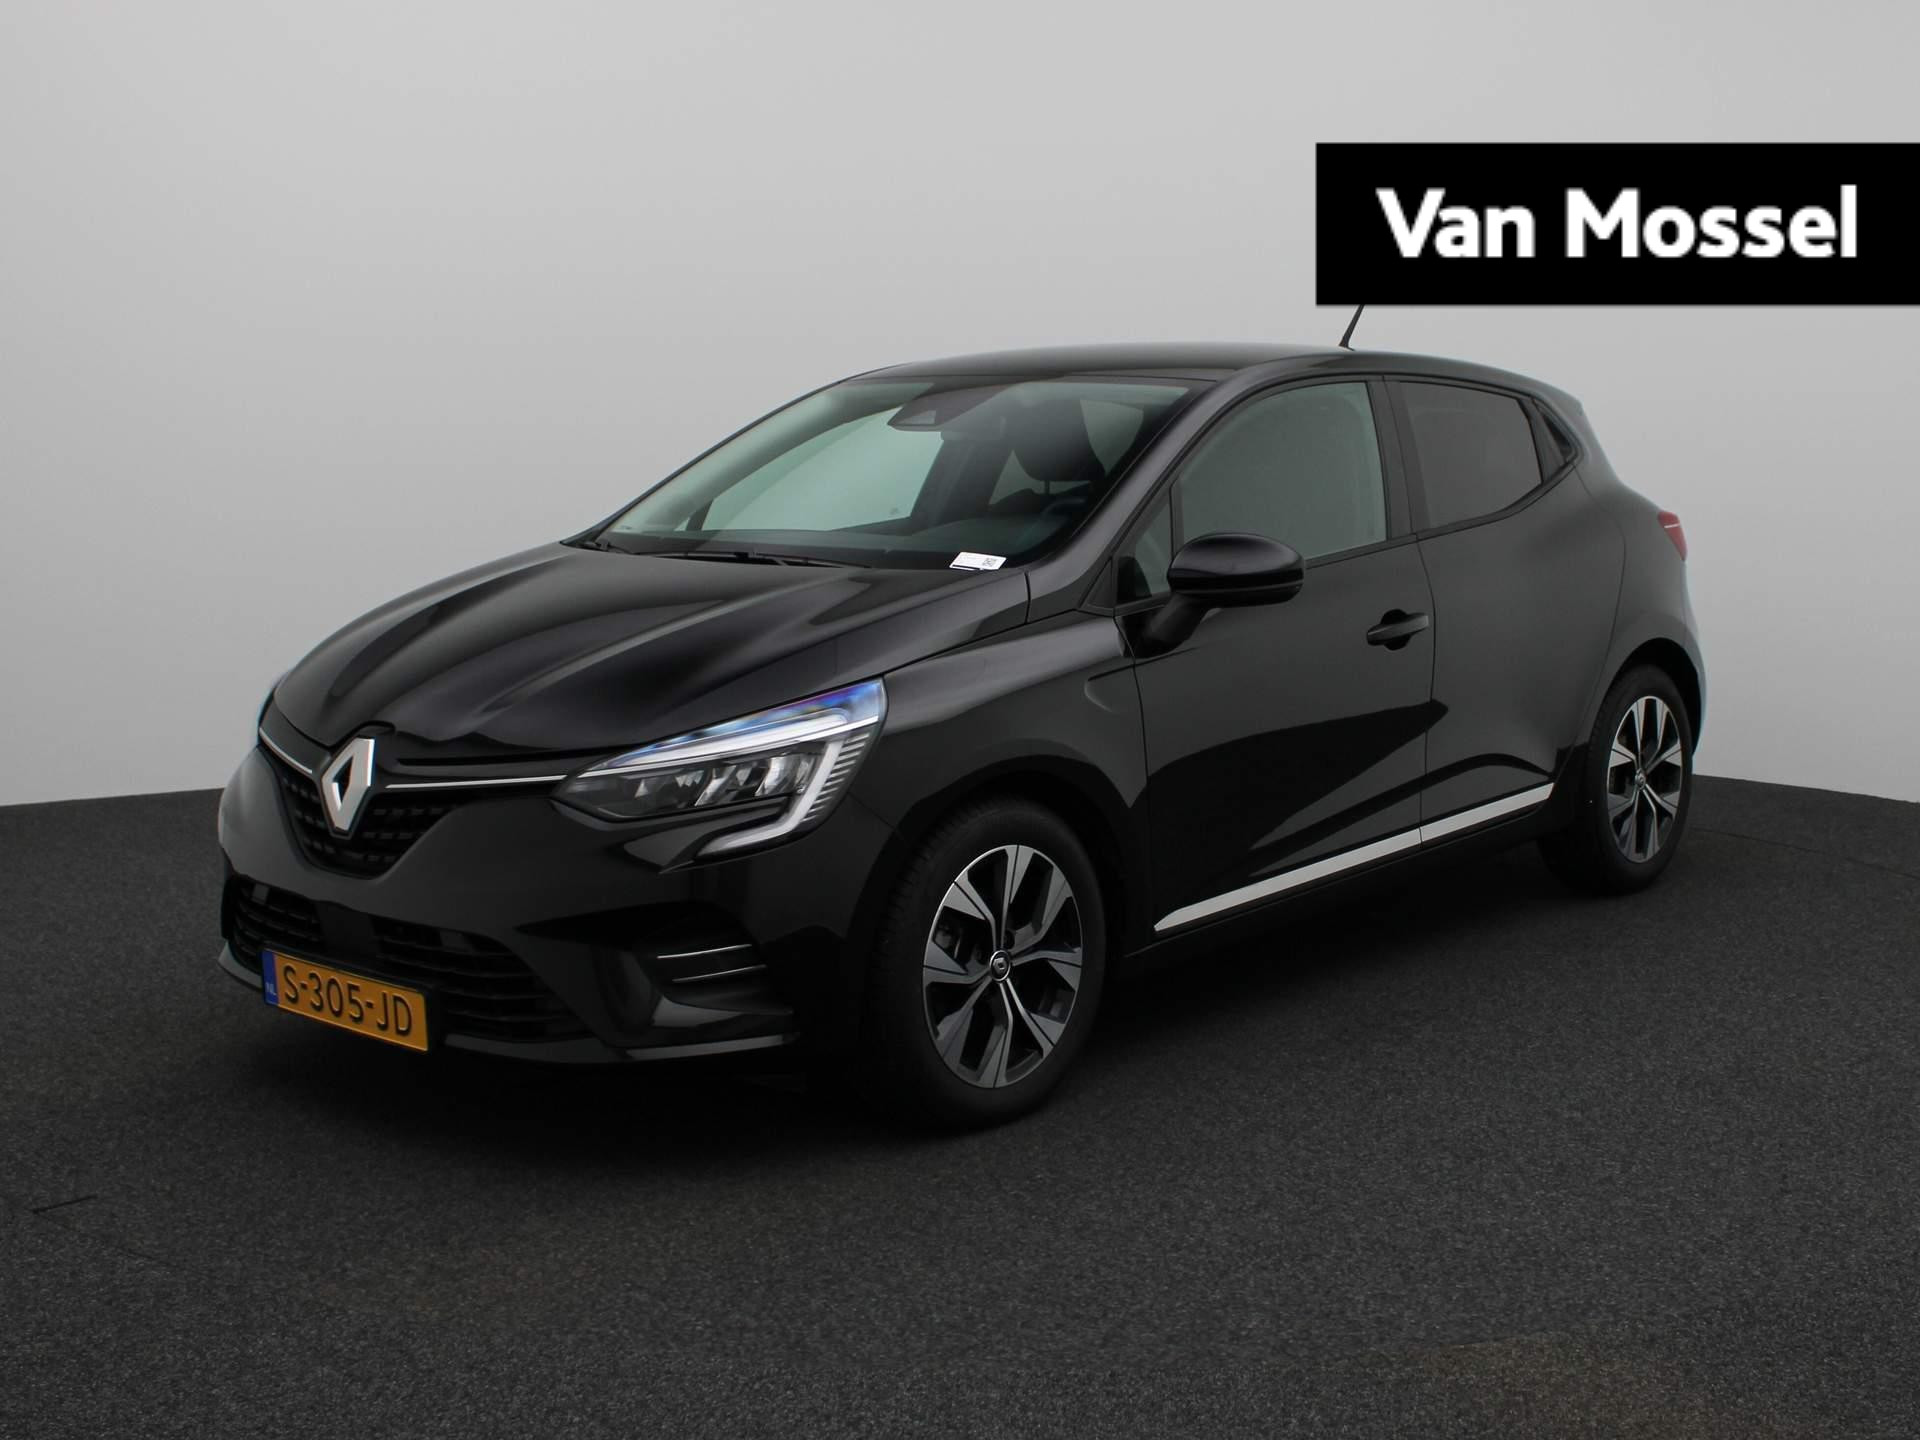 Renault Clio 1.0 TCe 90 Evolution | Climate Control | Full-Map Navigatie | Privacy Glass | PDC Achter | Keyless | 16" LMV | Apple Carplay & Android Auto